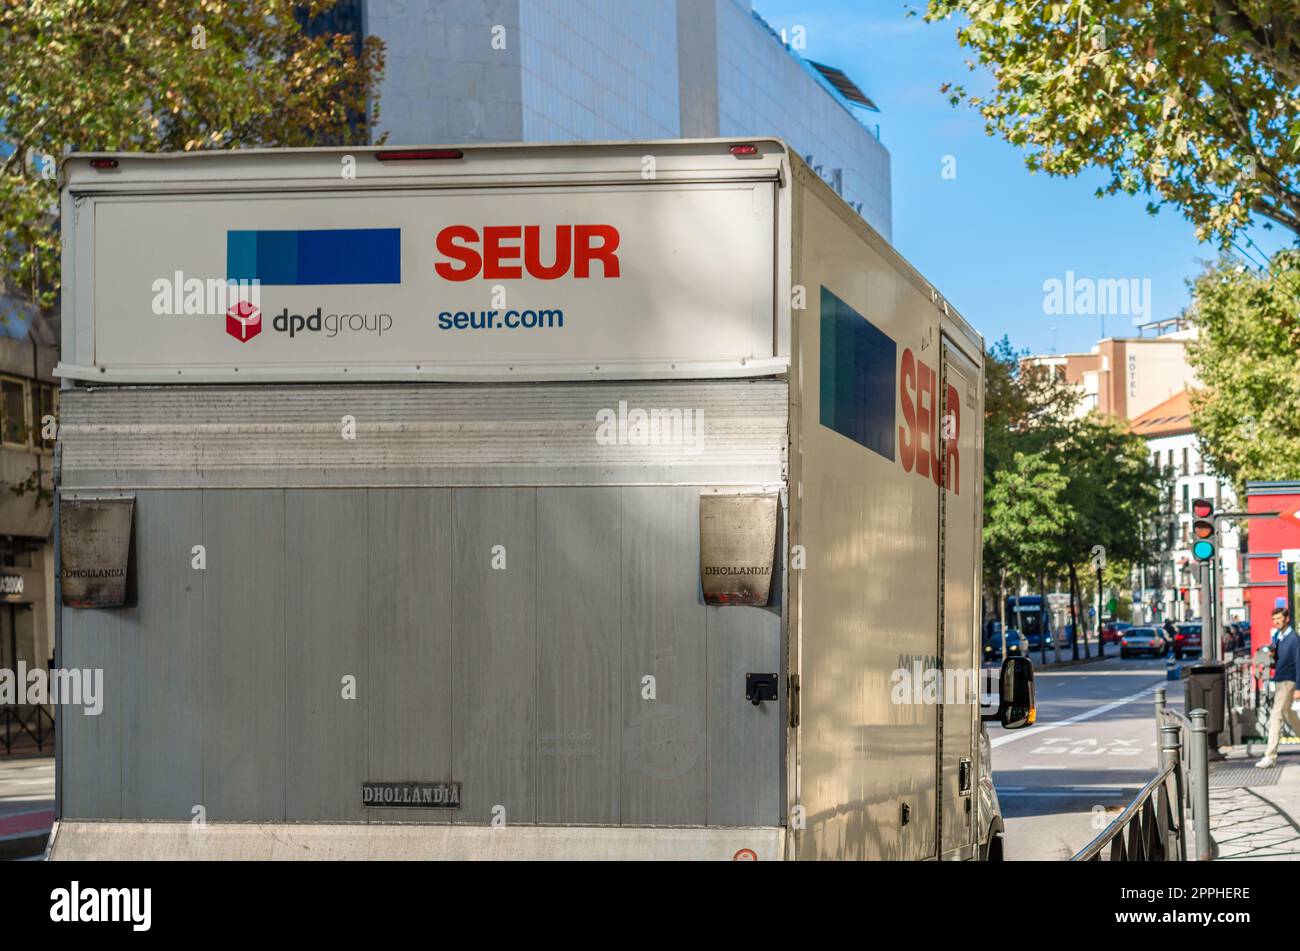 MADRID, SPAIN â€“ OCTOBER 5, 2021: Van of the freight transport company SEUR (Servicio EspaÃ±ol Urgente de Reparto, spanish for: Spanish Urgent Delivery Service), a subsidiary of the French group DPDgroup Stock Photo